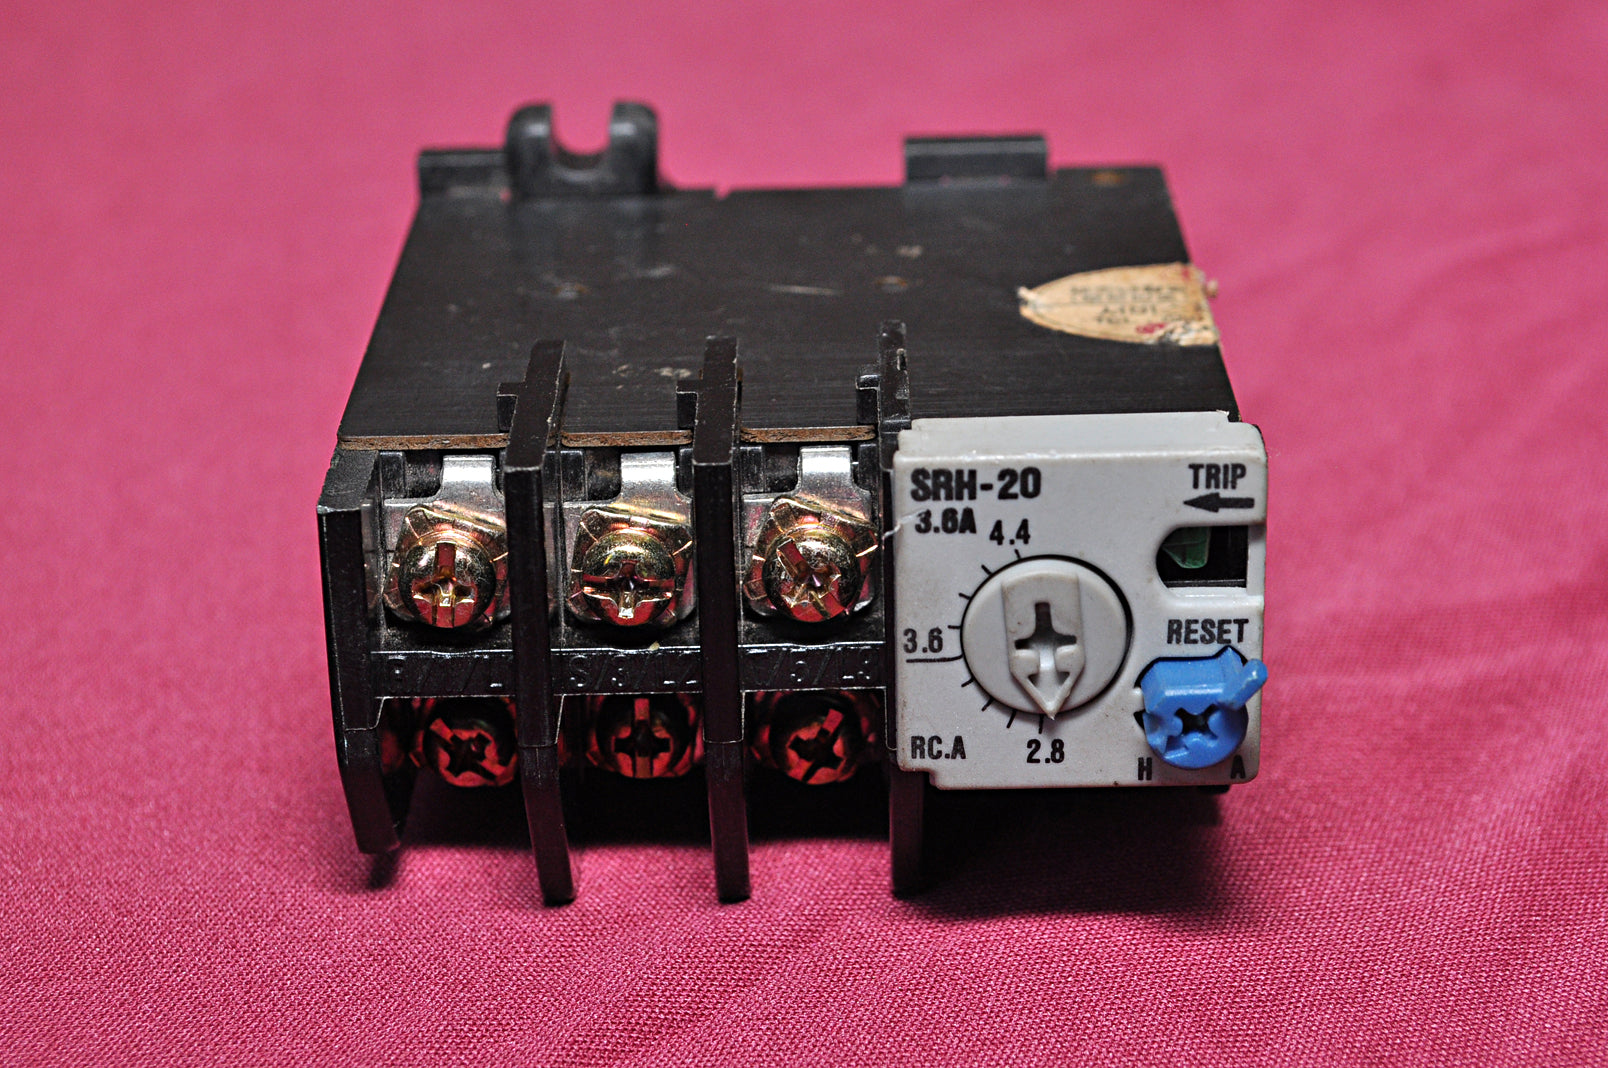 Lg srh-20 thermal overload relay 3.6a